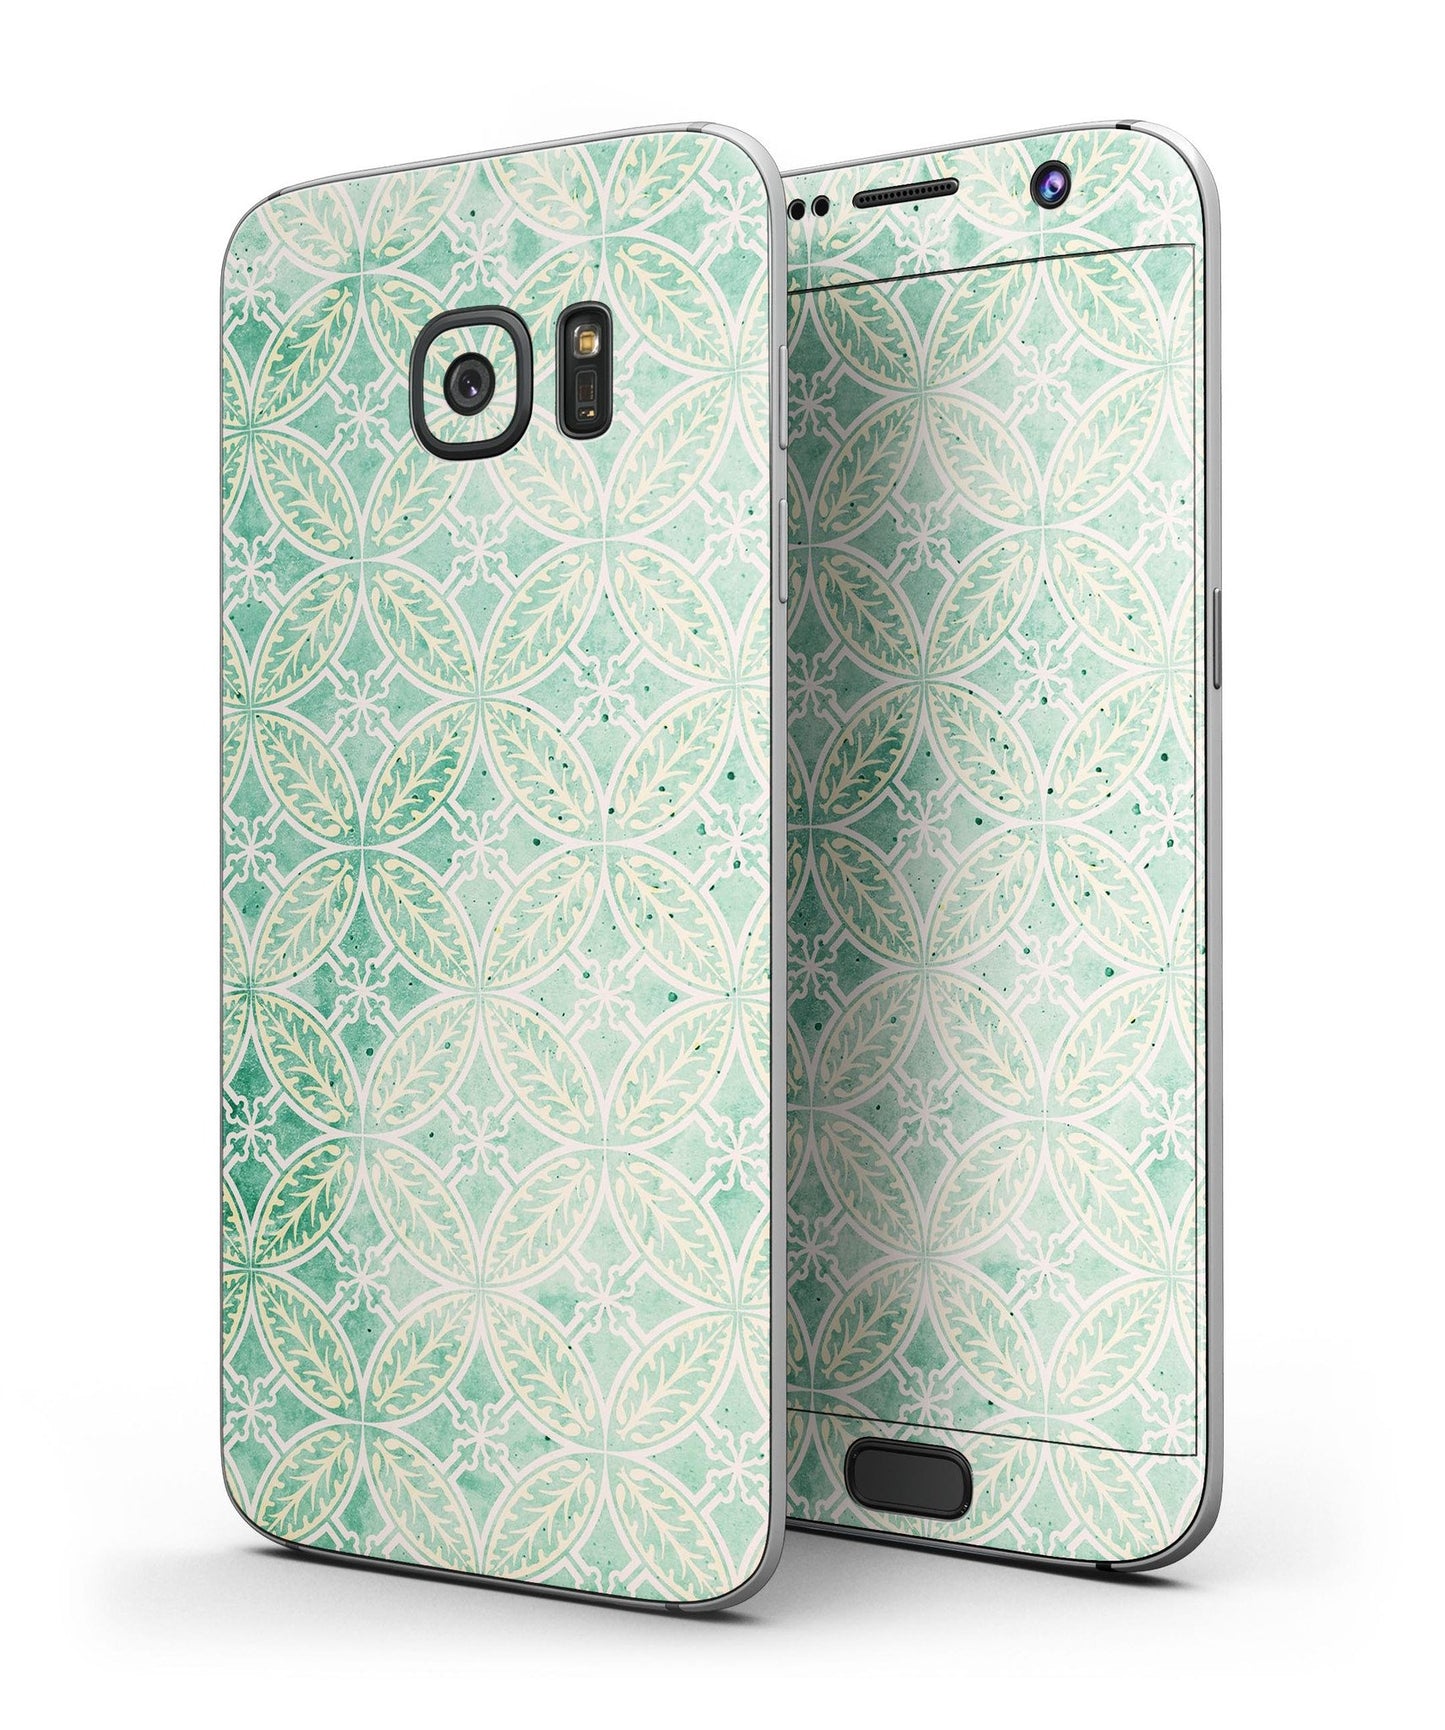 Faded Blue and Green Overlapping CIrcles - Full Body Skin-Kit for the